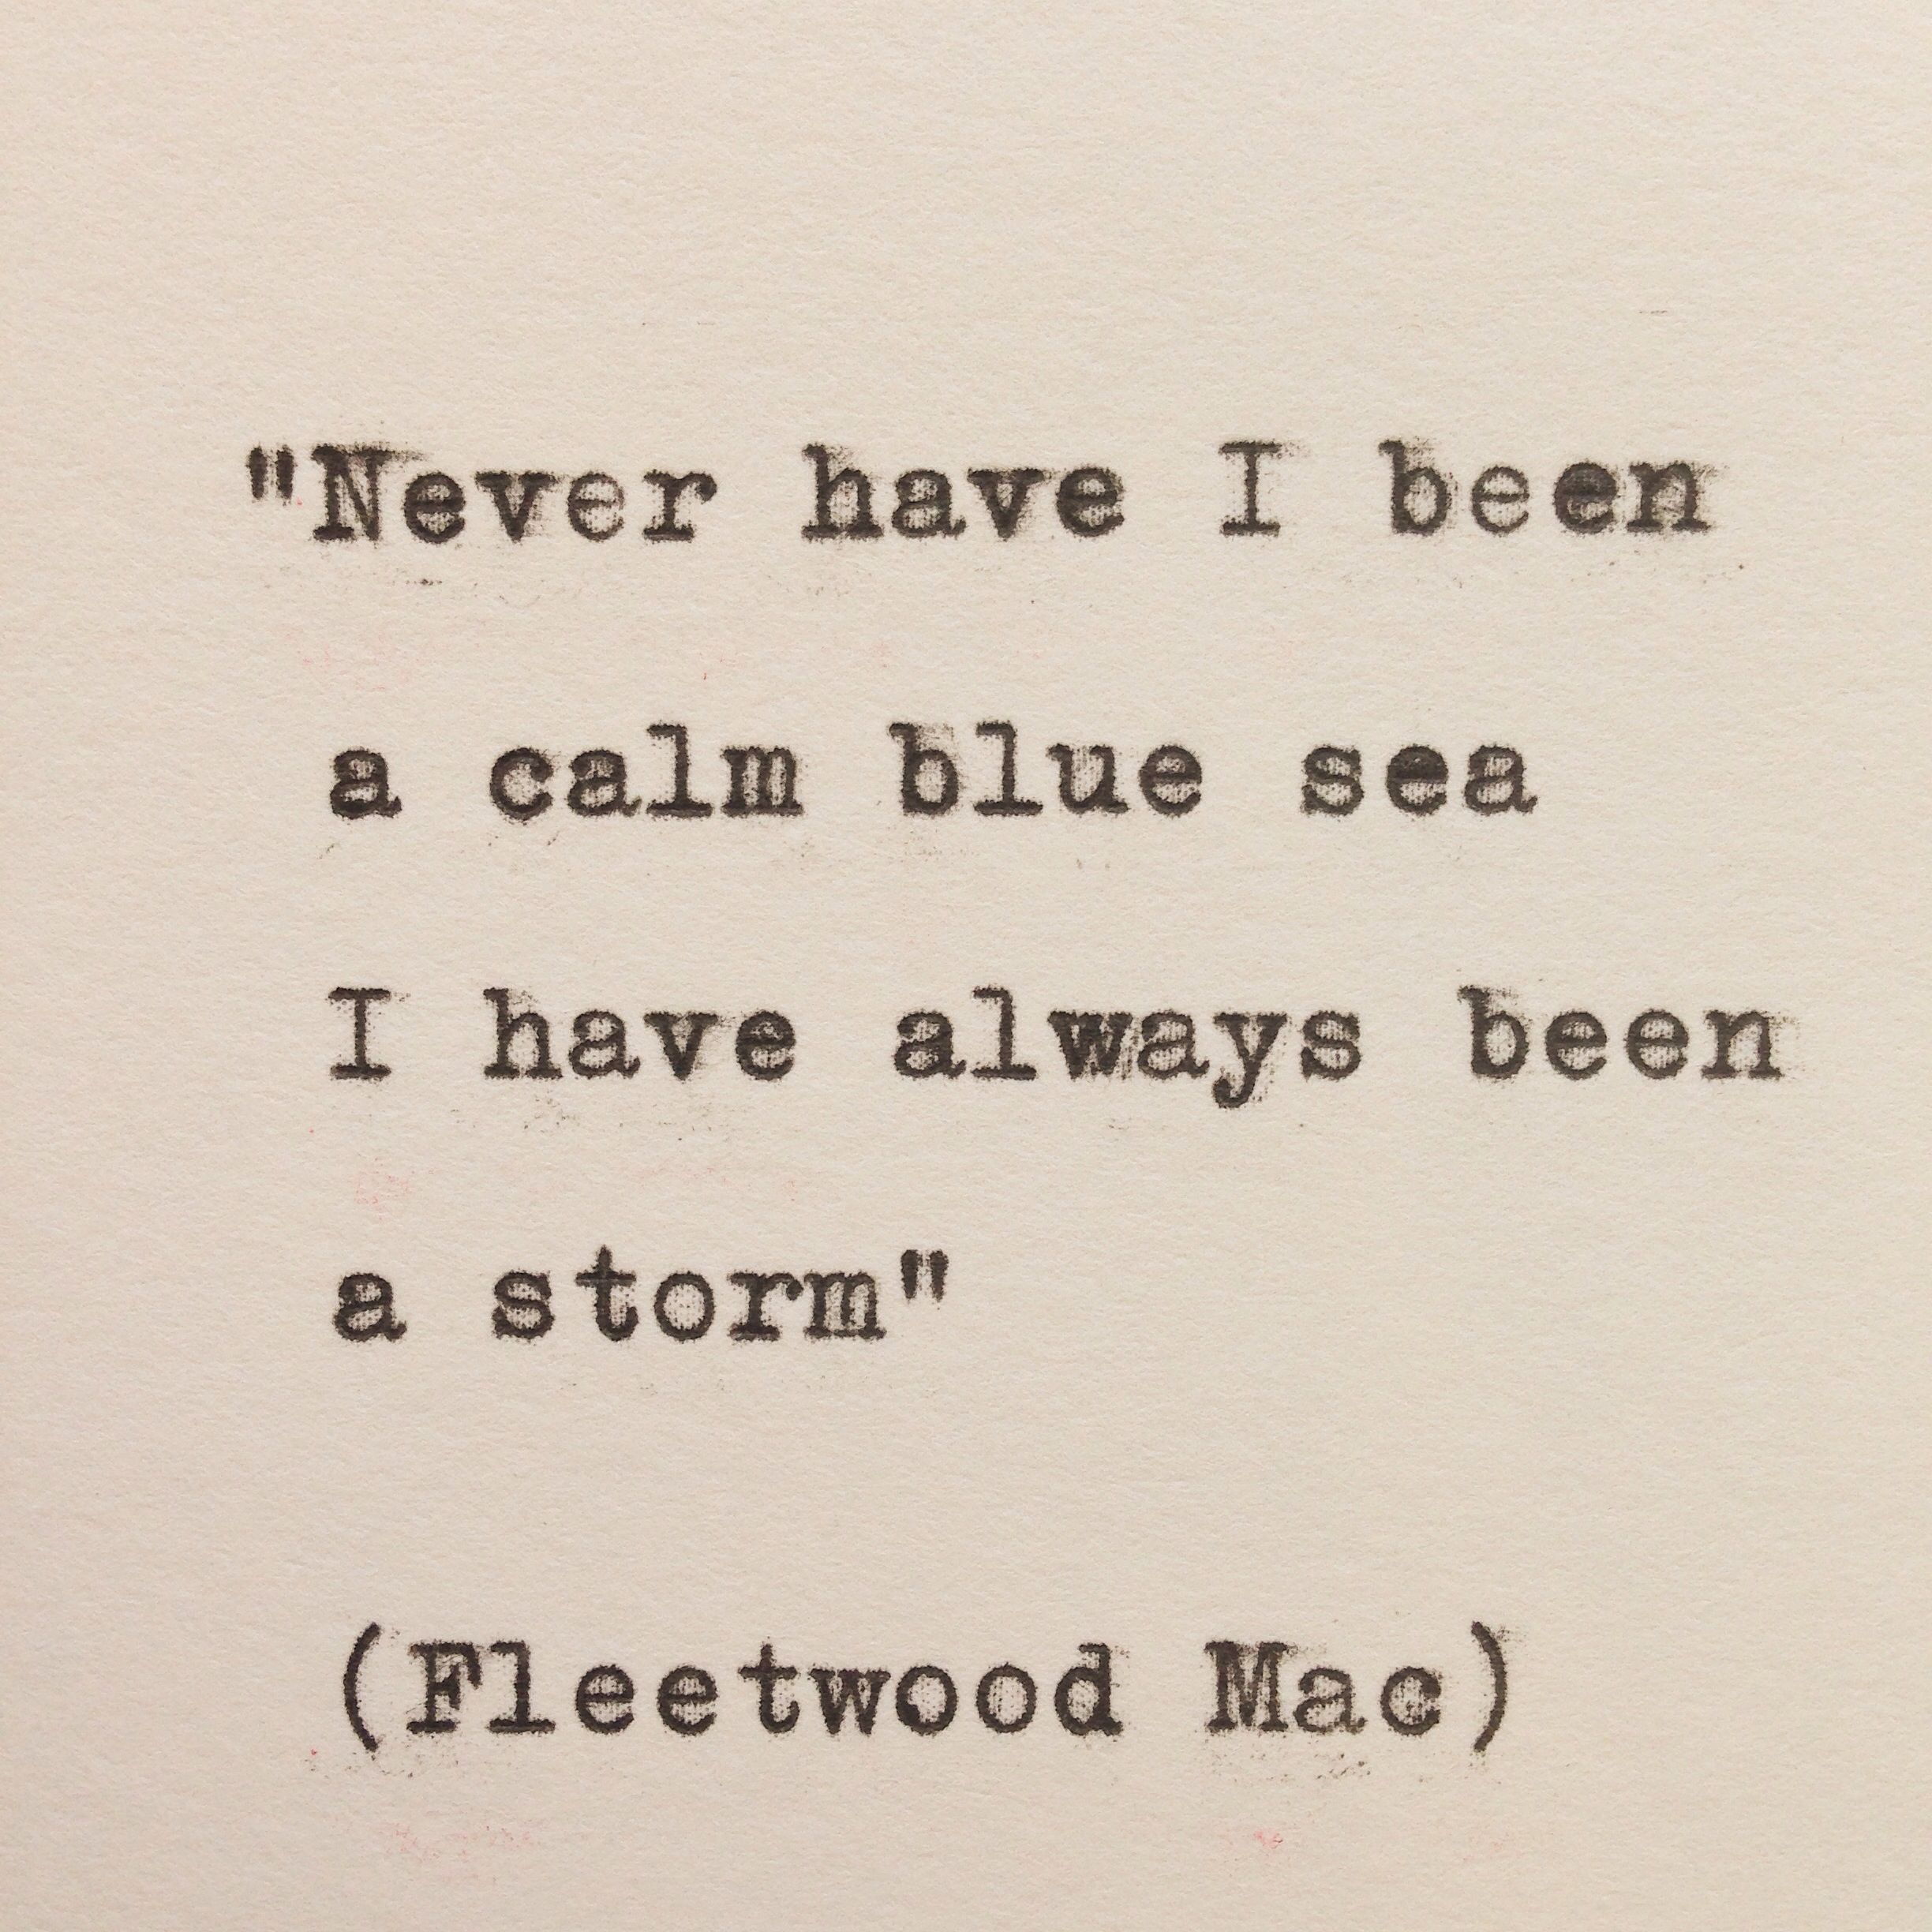 Fleetwood Mac – Storms. “never ever have I been a calm blue sea I have always been a storm”